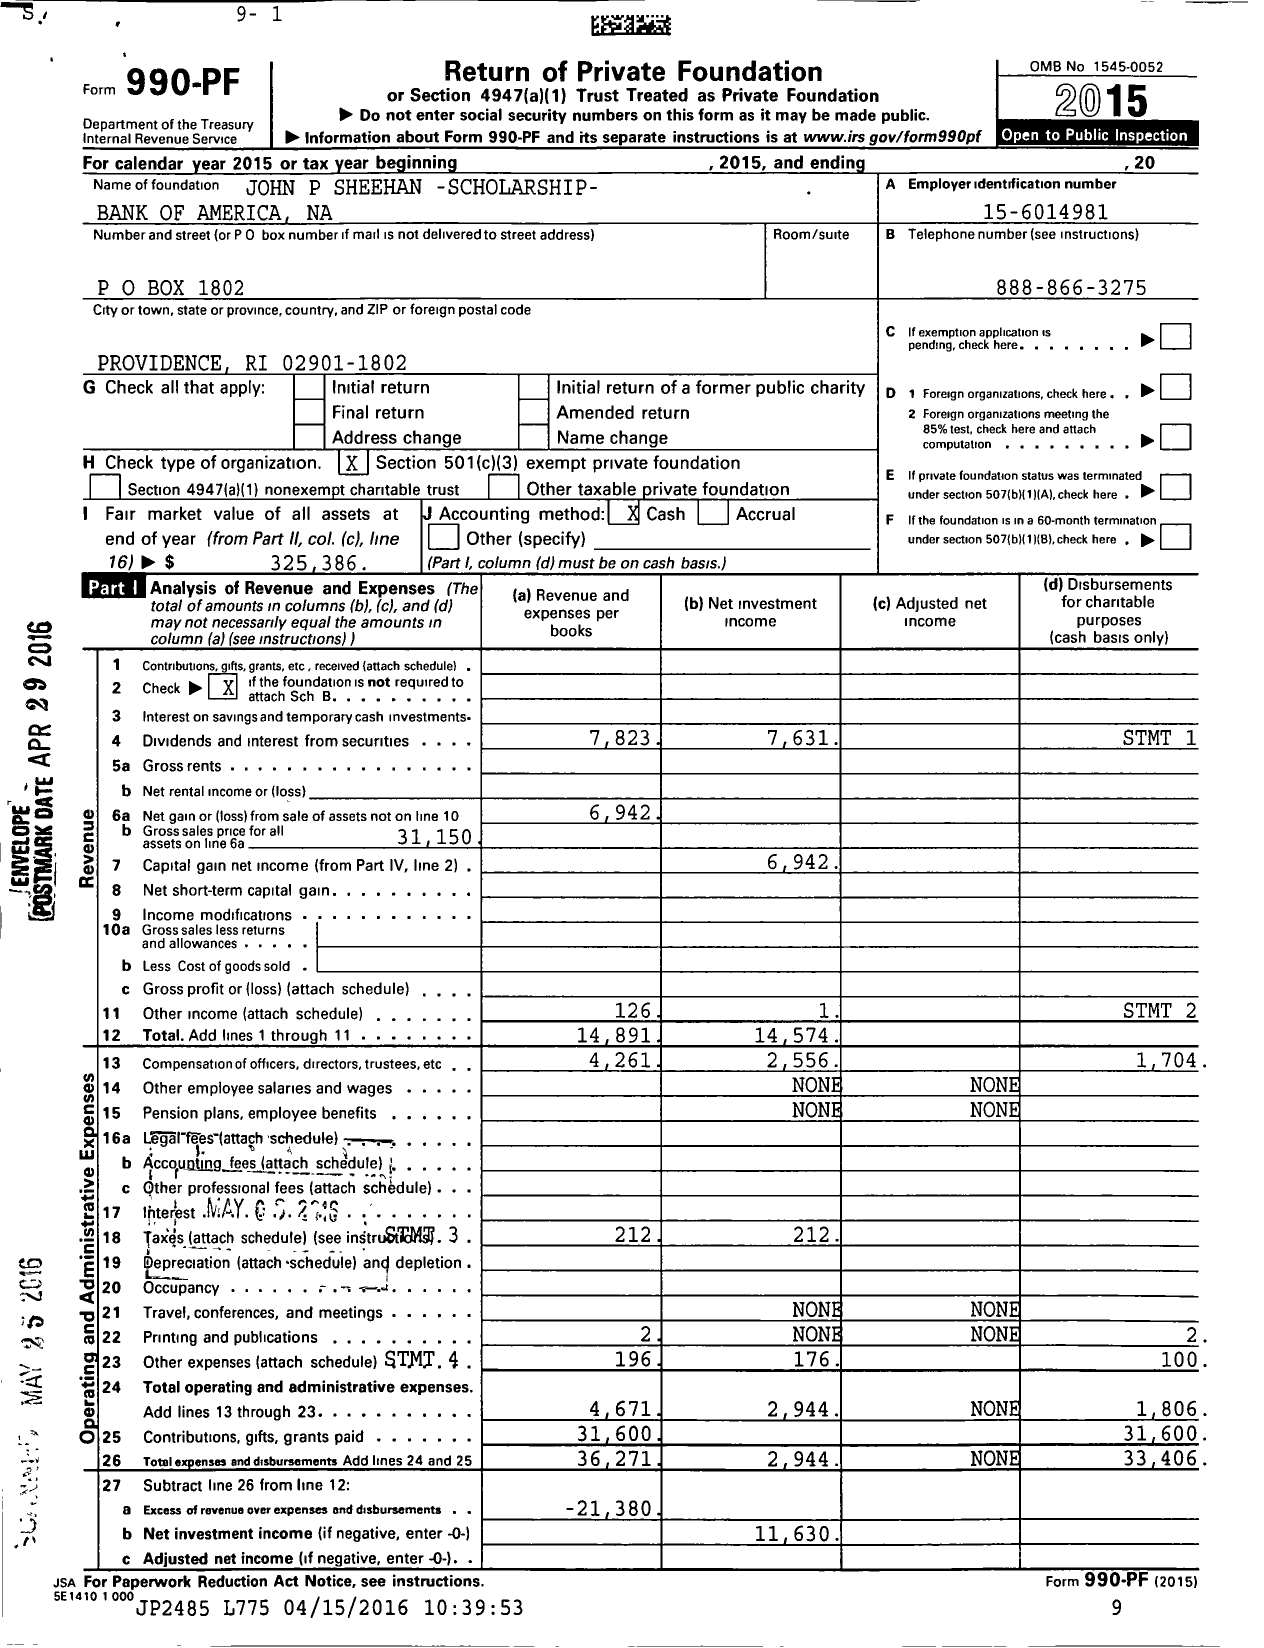 Image of first page of 2015 Form 990PF for John P Sheehan- Scholarship Bank of America Na